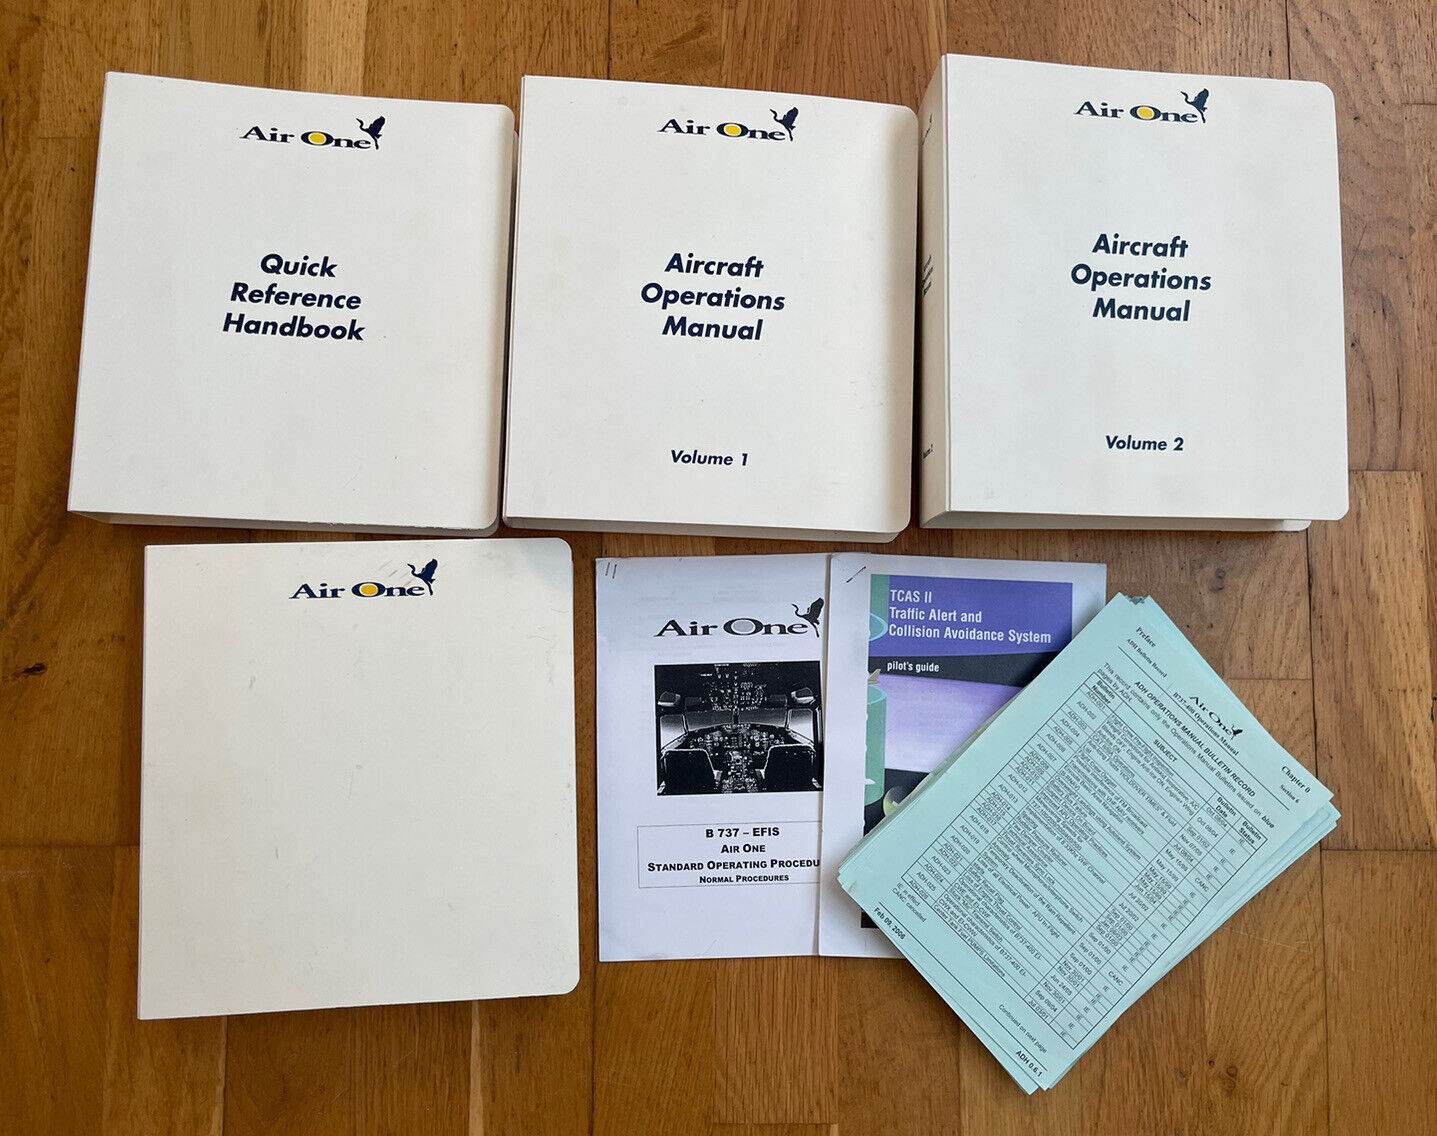 Airone Airlines Pilot Manuals Boeing 737 Including Q.R.H.